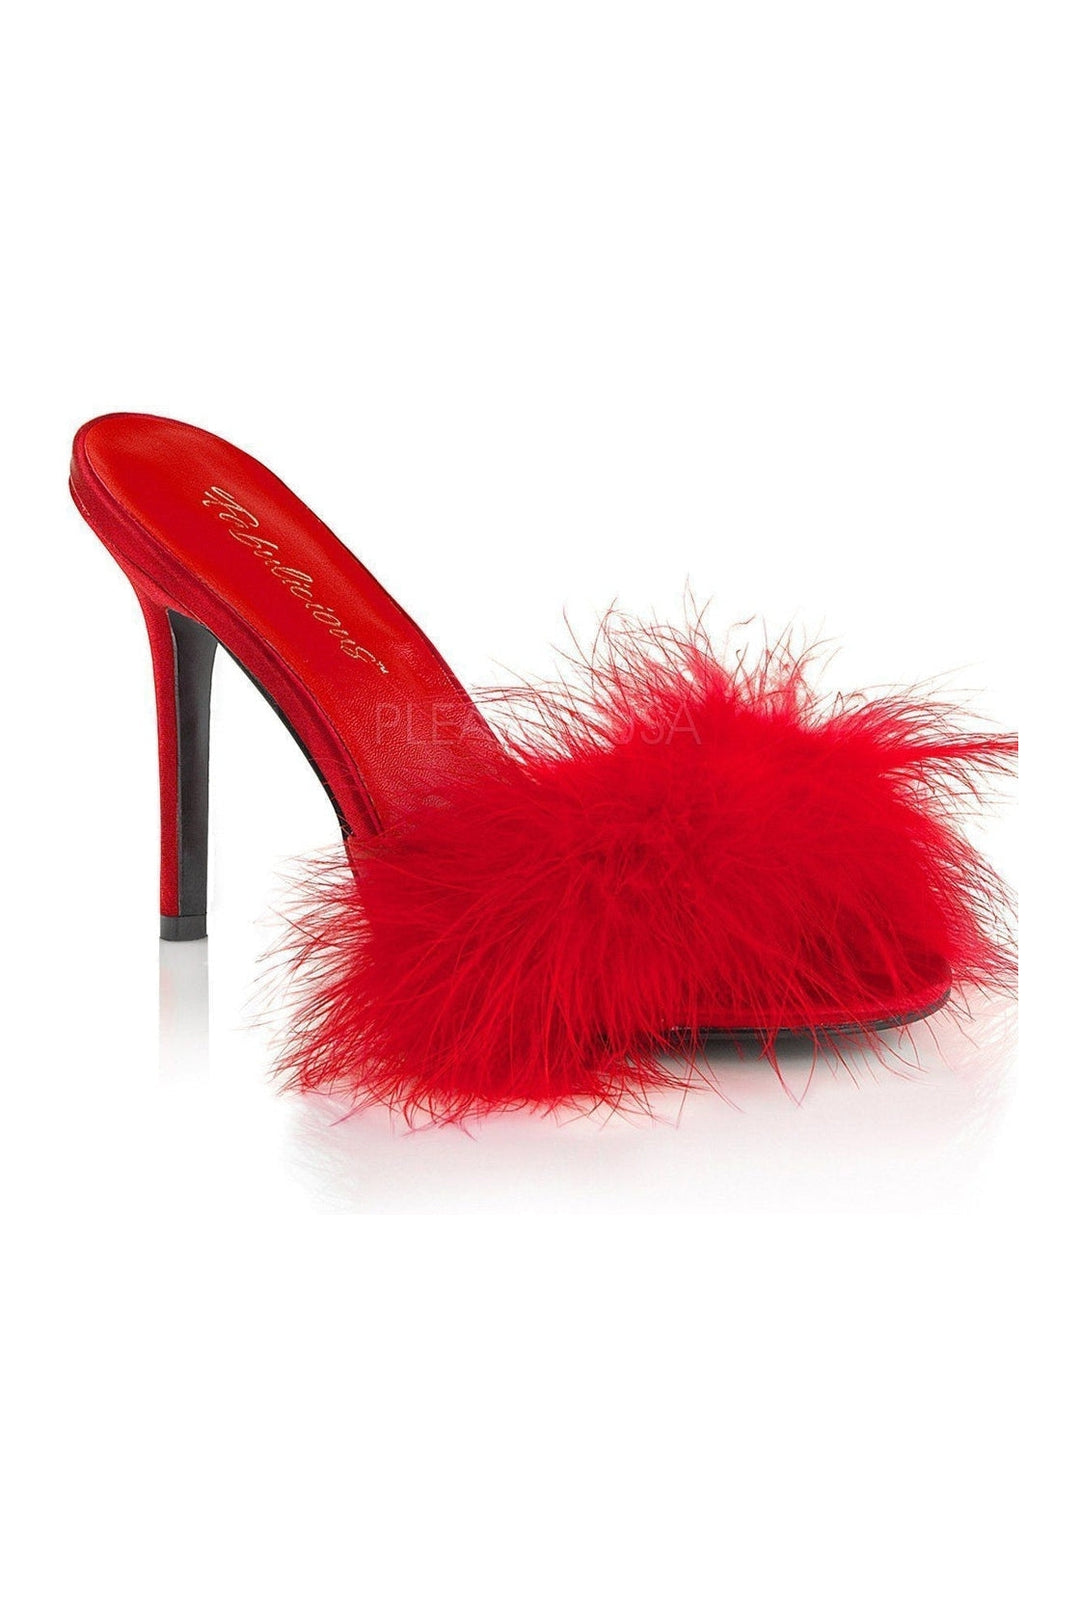 CLASSIQUE-01F Slide | Red Faux Leather-Fabulicious-Red-Marabous-SEXYSHOES.COM